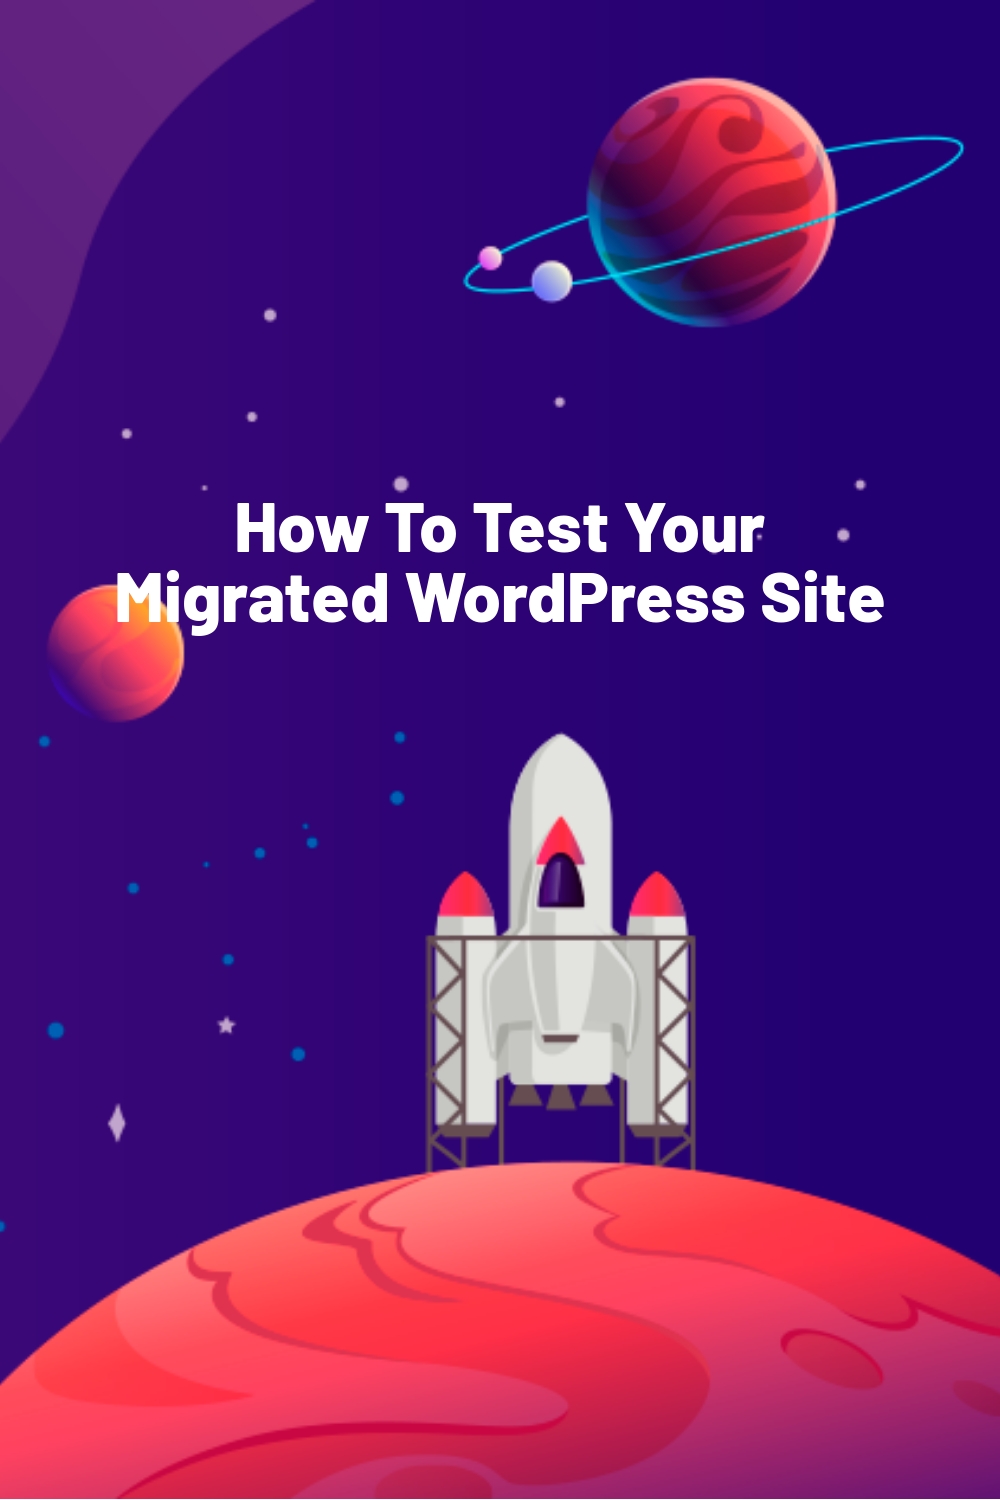 How To Test Your Migrated WordPress Site